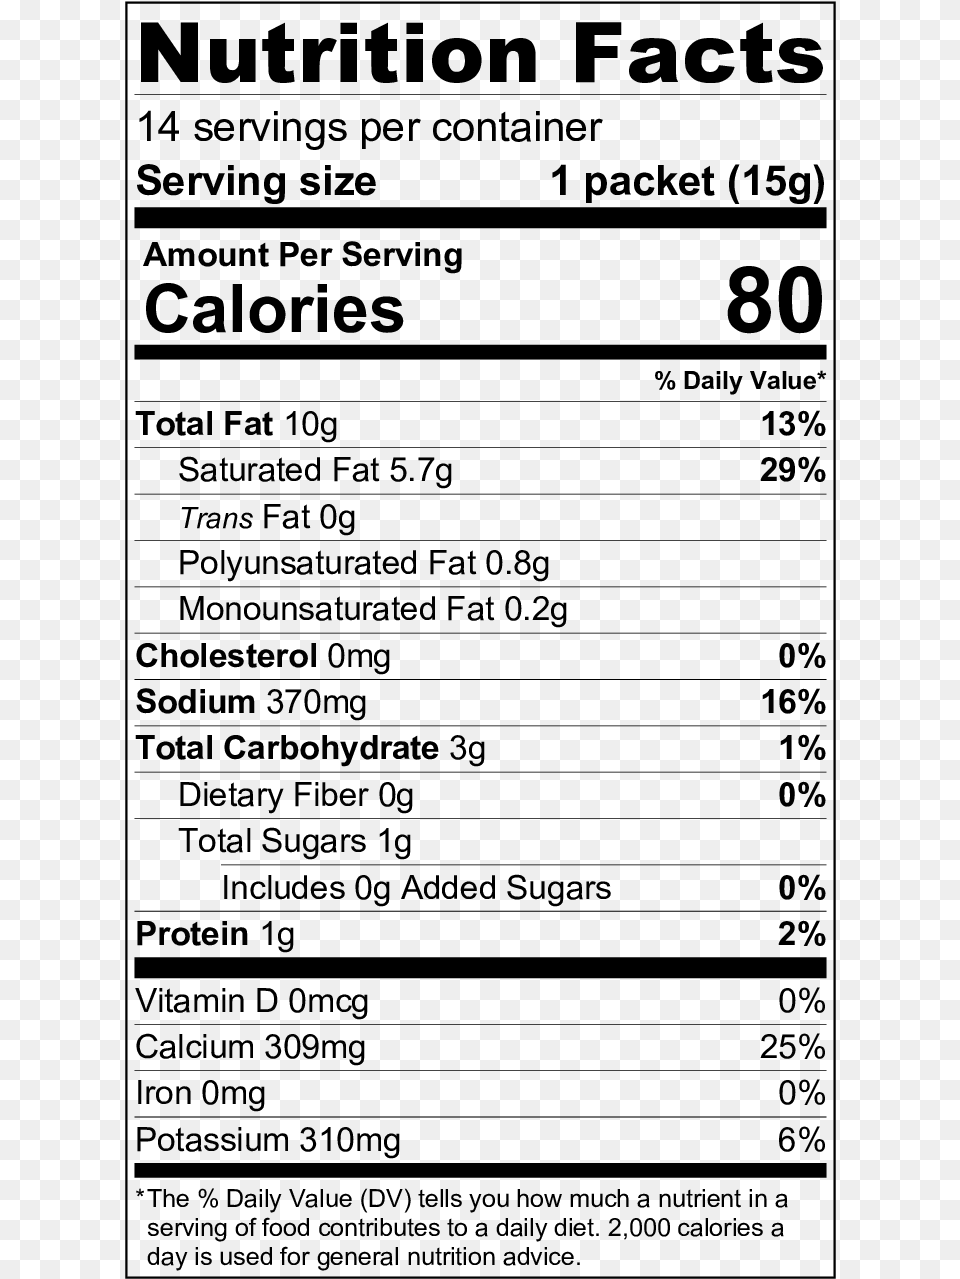 Groundnut Oil Nutrition Facts, Gray Png Image